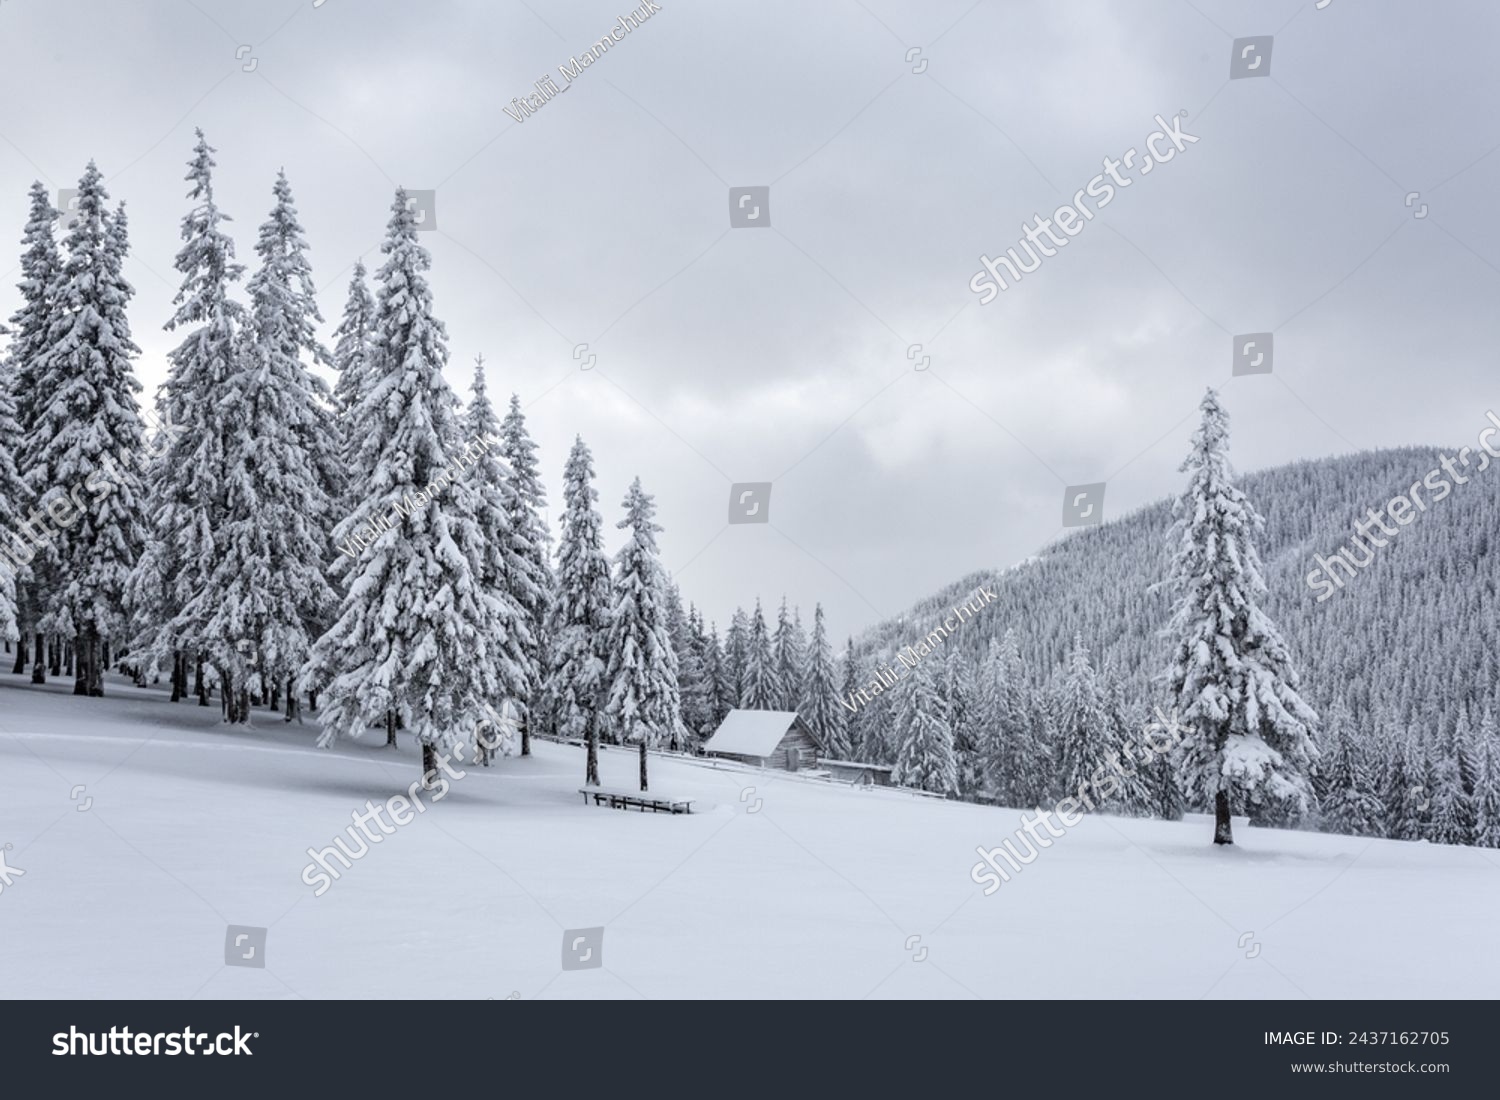 Old wooden forester's house on the lawn covered with snow. Landscape on winter day. Snowdrifts. Christmas wonderland. High mountain. Snowy wallpaper background. Nature scenery. #2437162705